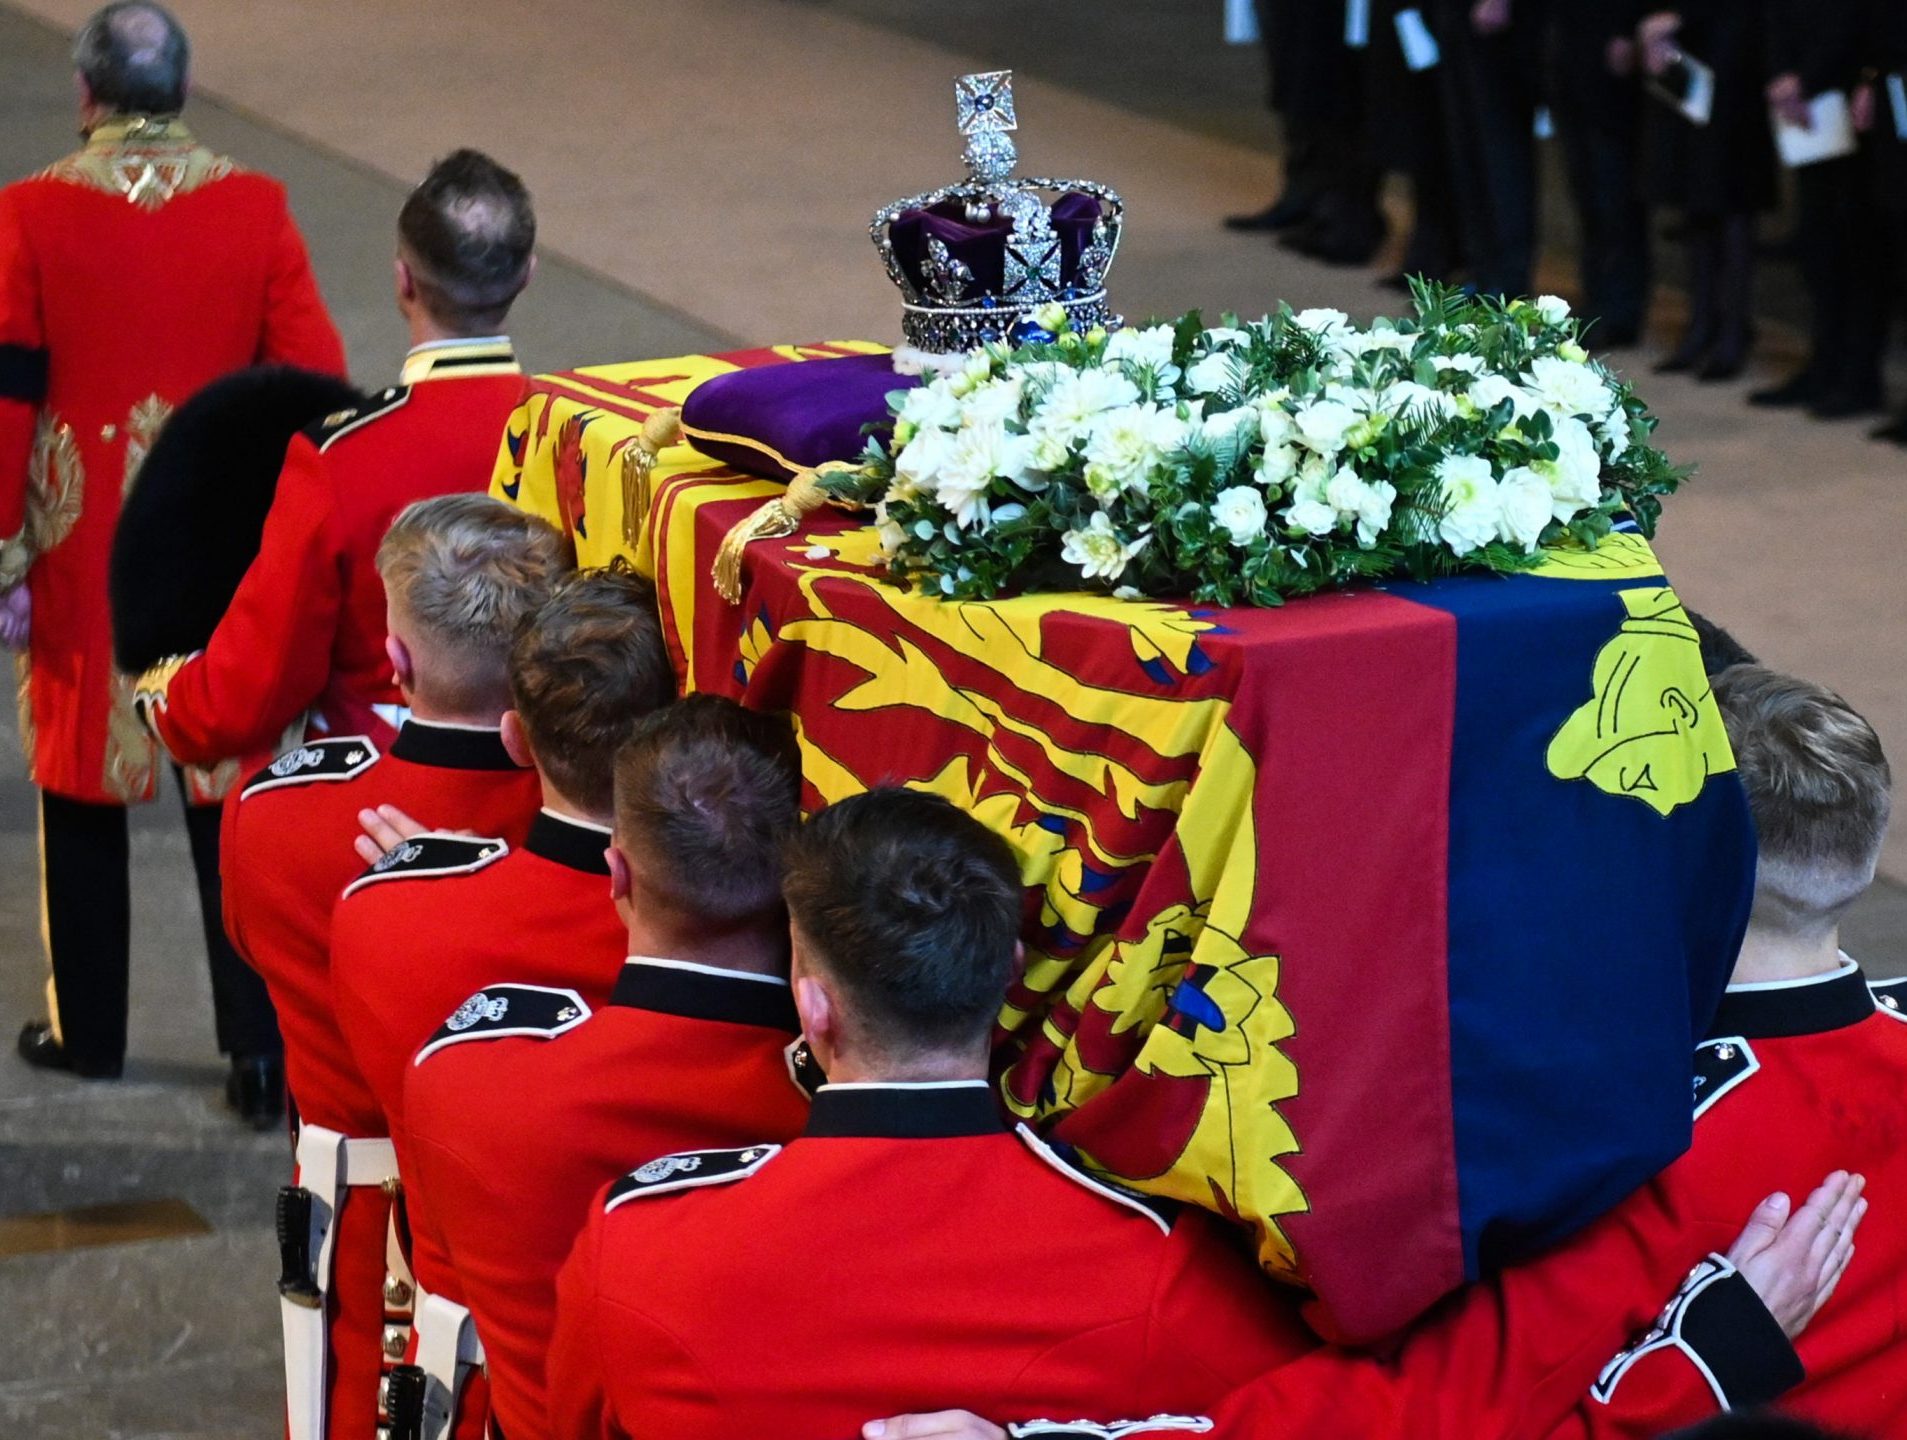 A photograph of Queen Elizabeth II's Coffin on the day of her funeral